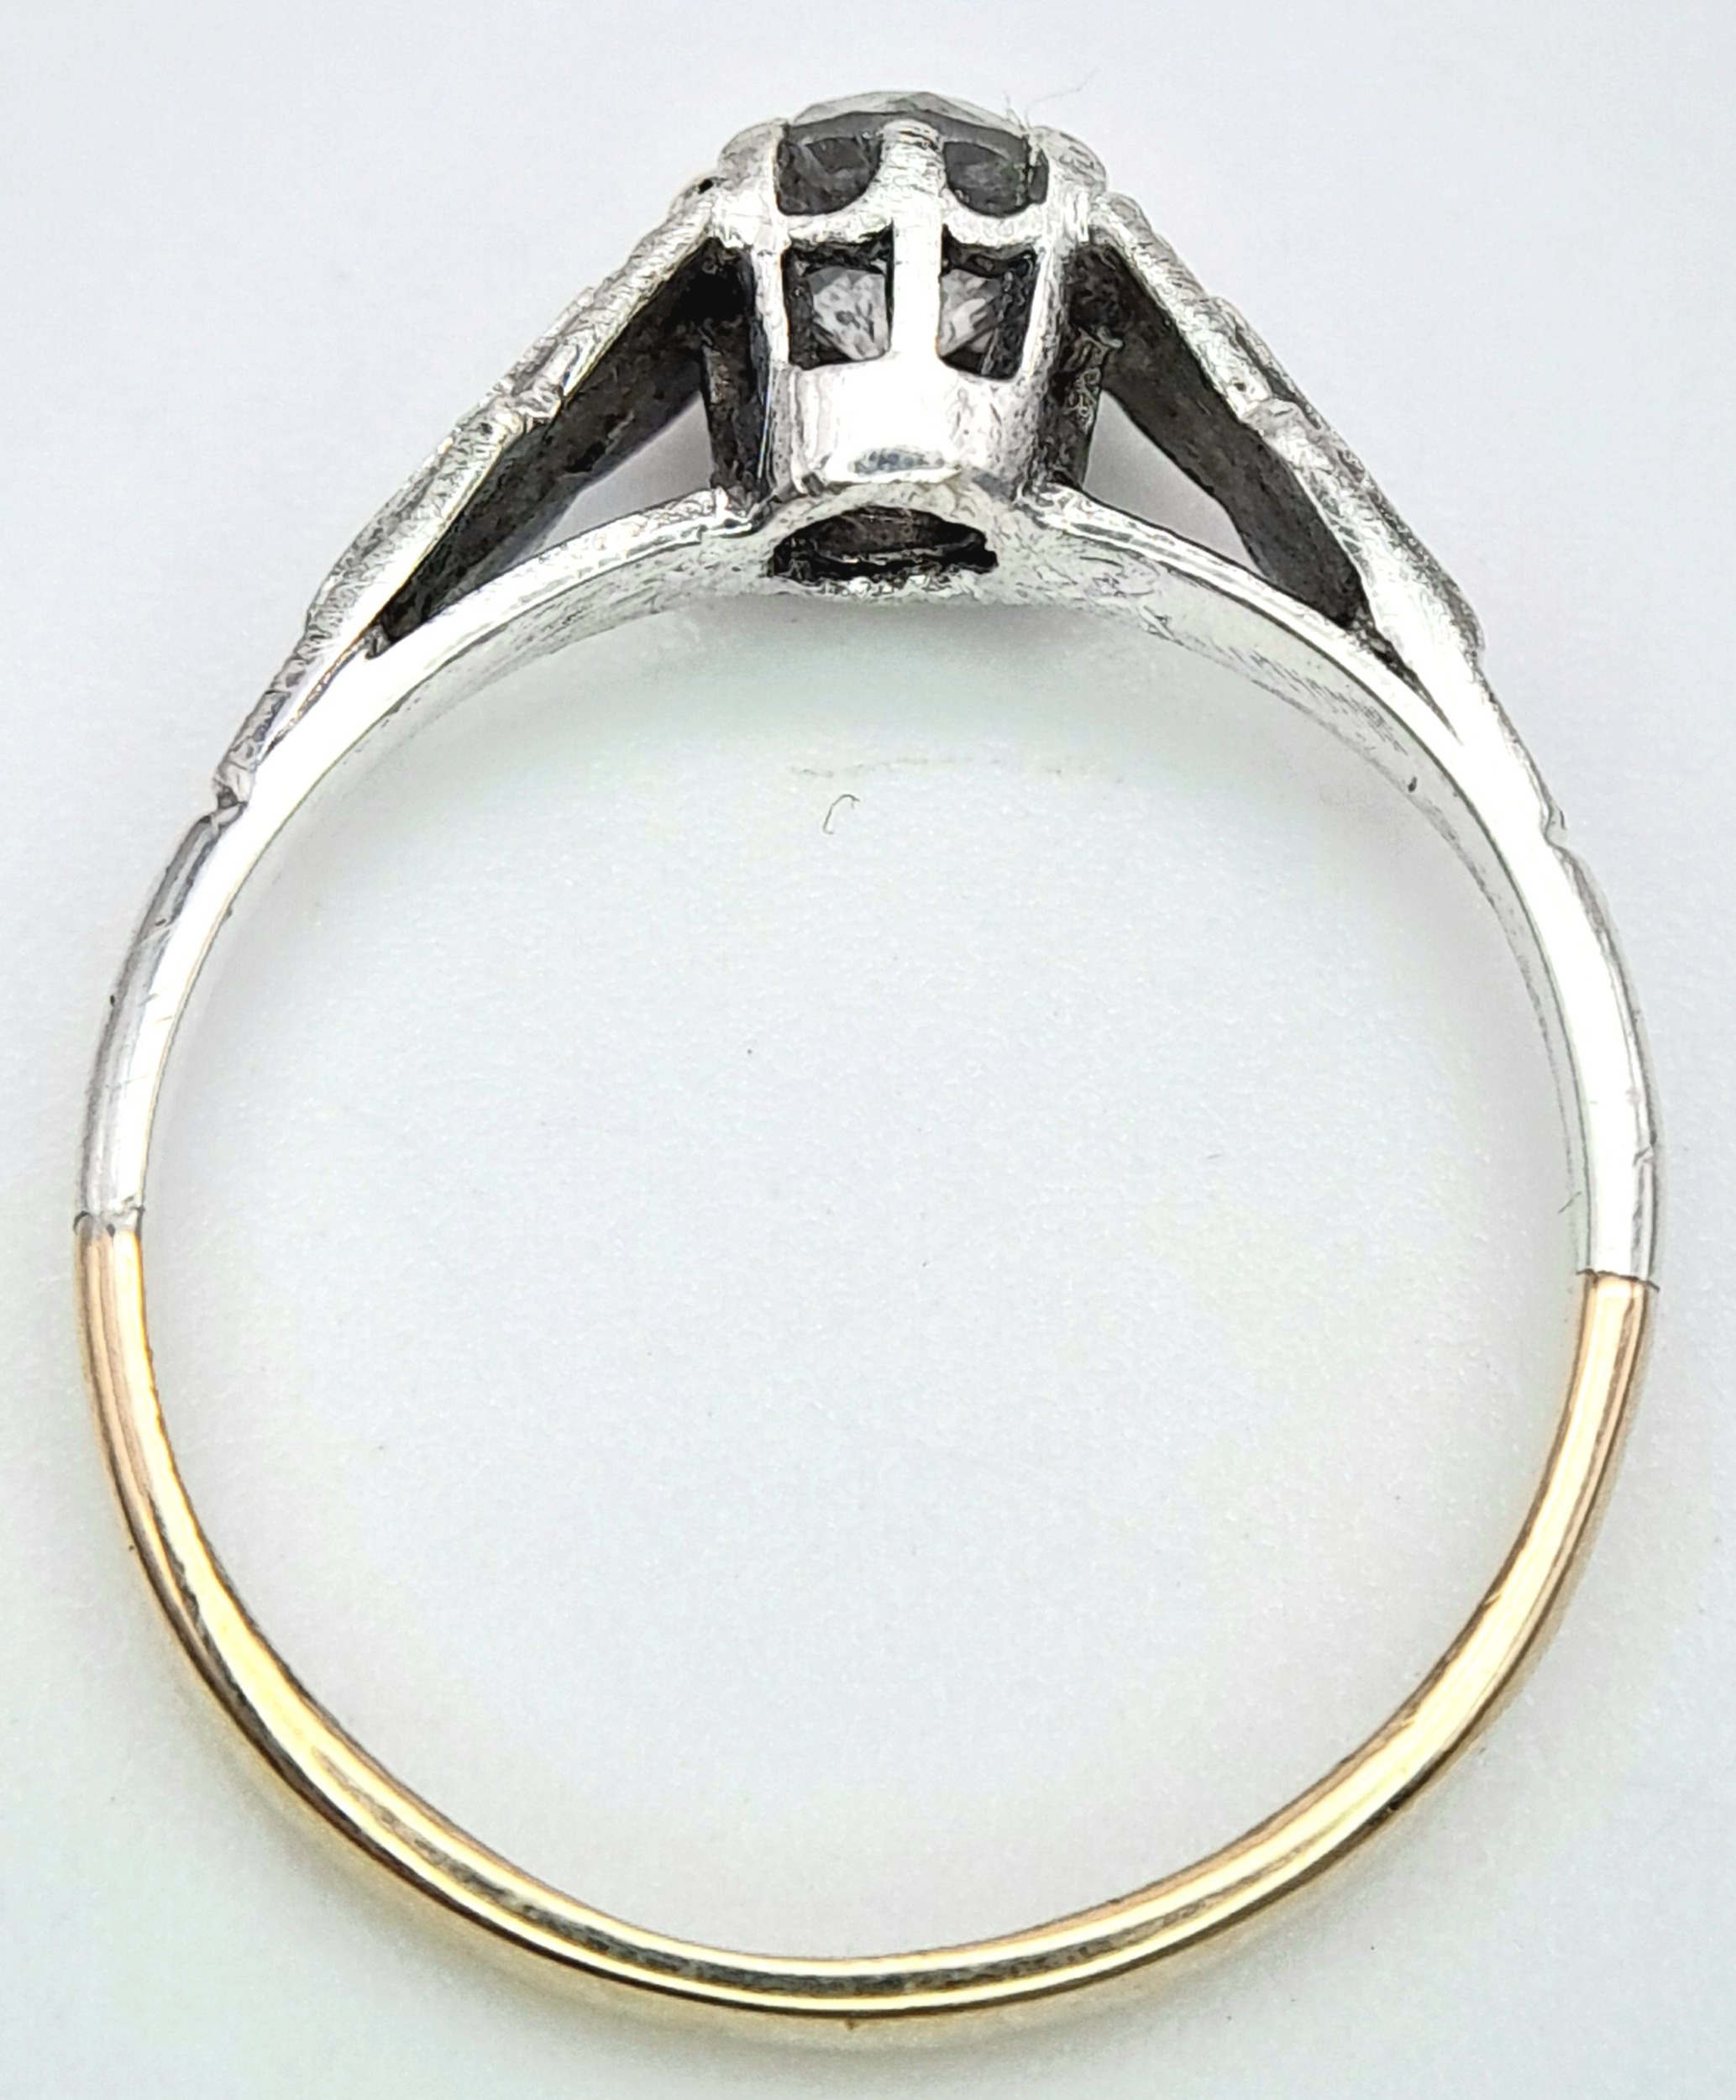 A 9K Yellow Gold (tested) Diamond Solitaire Ring. Size M. 1.9g total weight. - Image 3 of 5